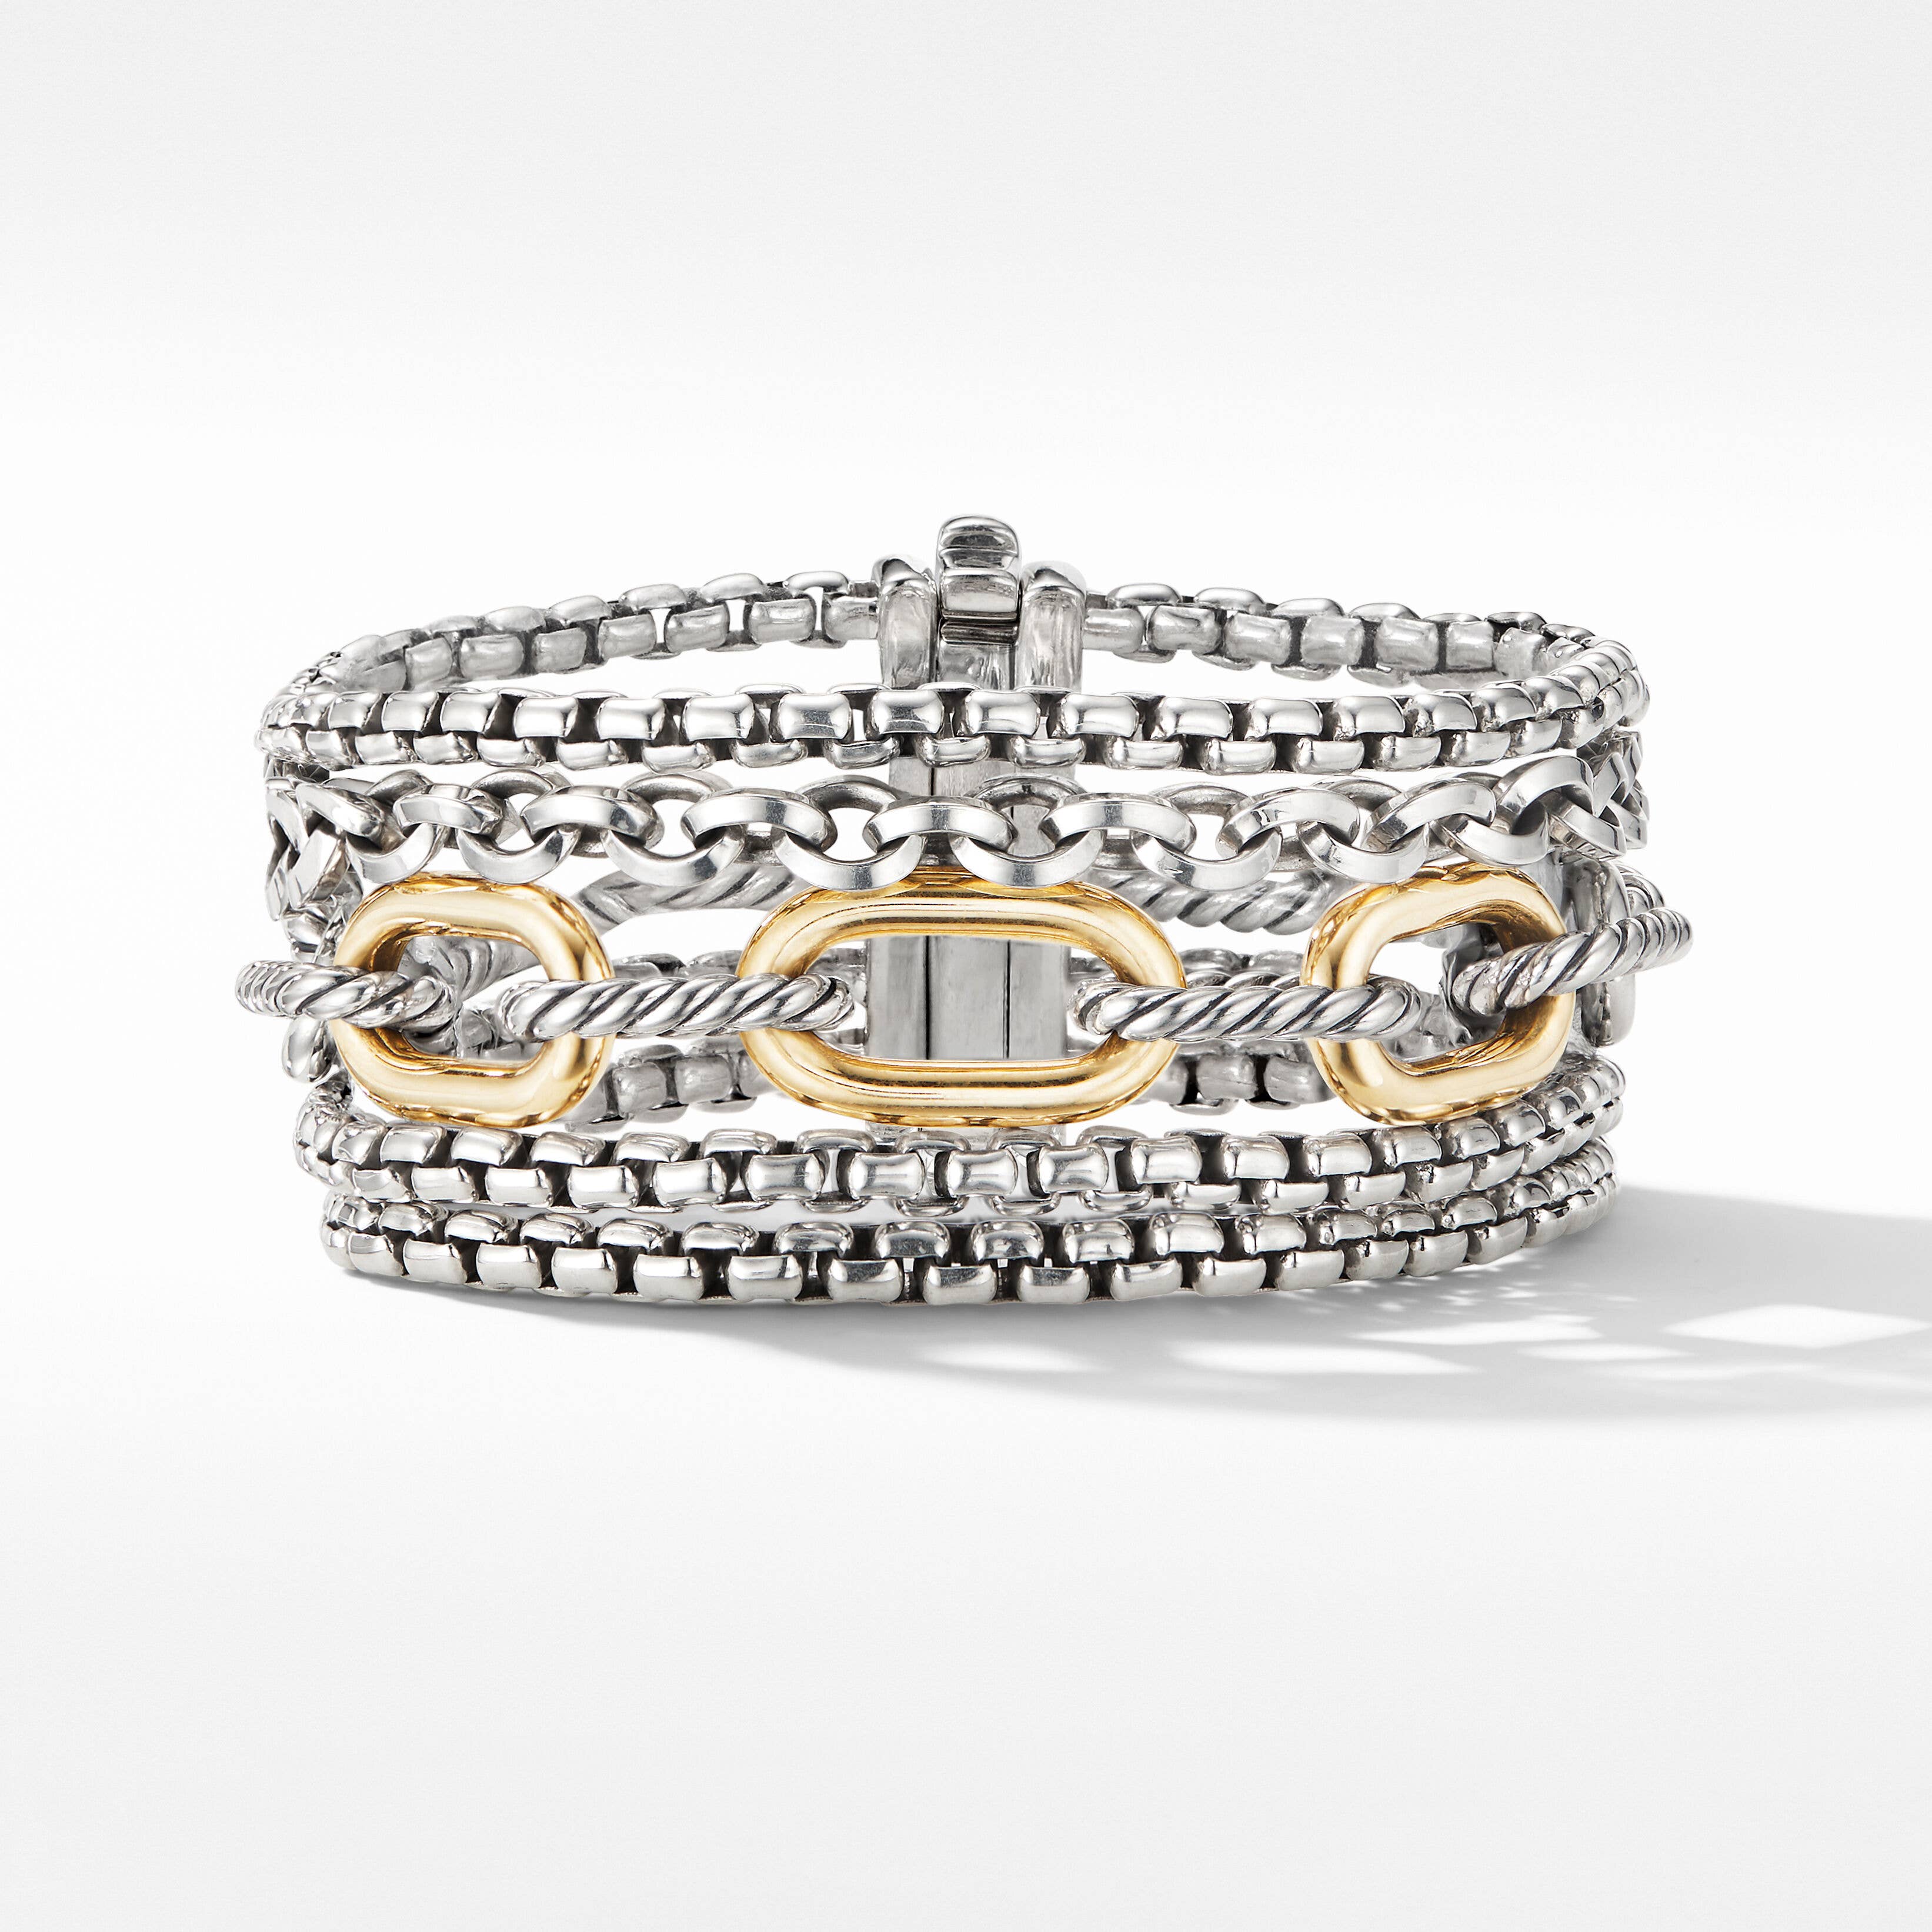 Multi Row Chain Bracelet with 18K Yellow Gold